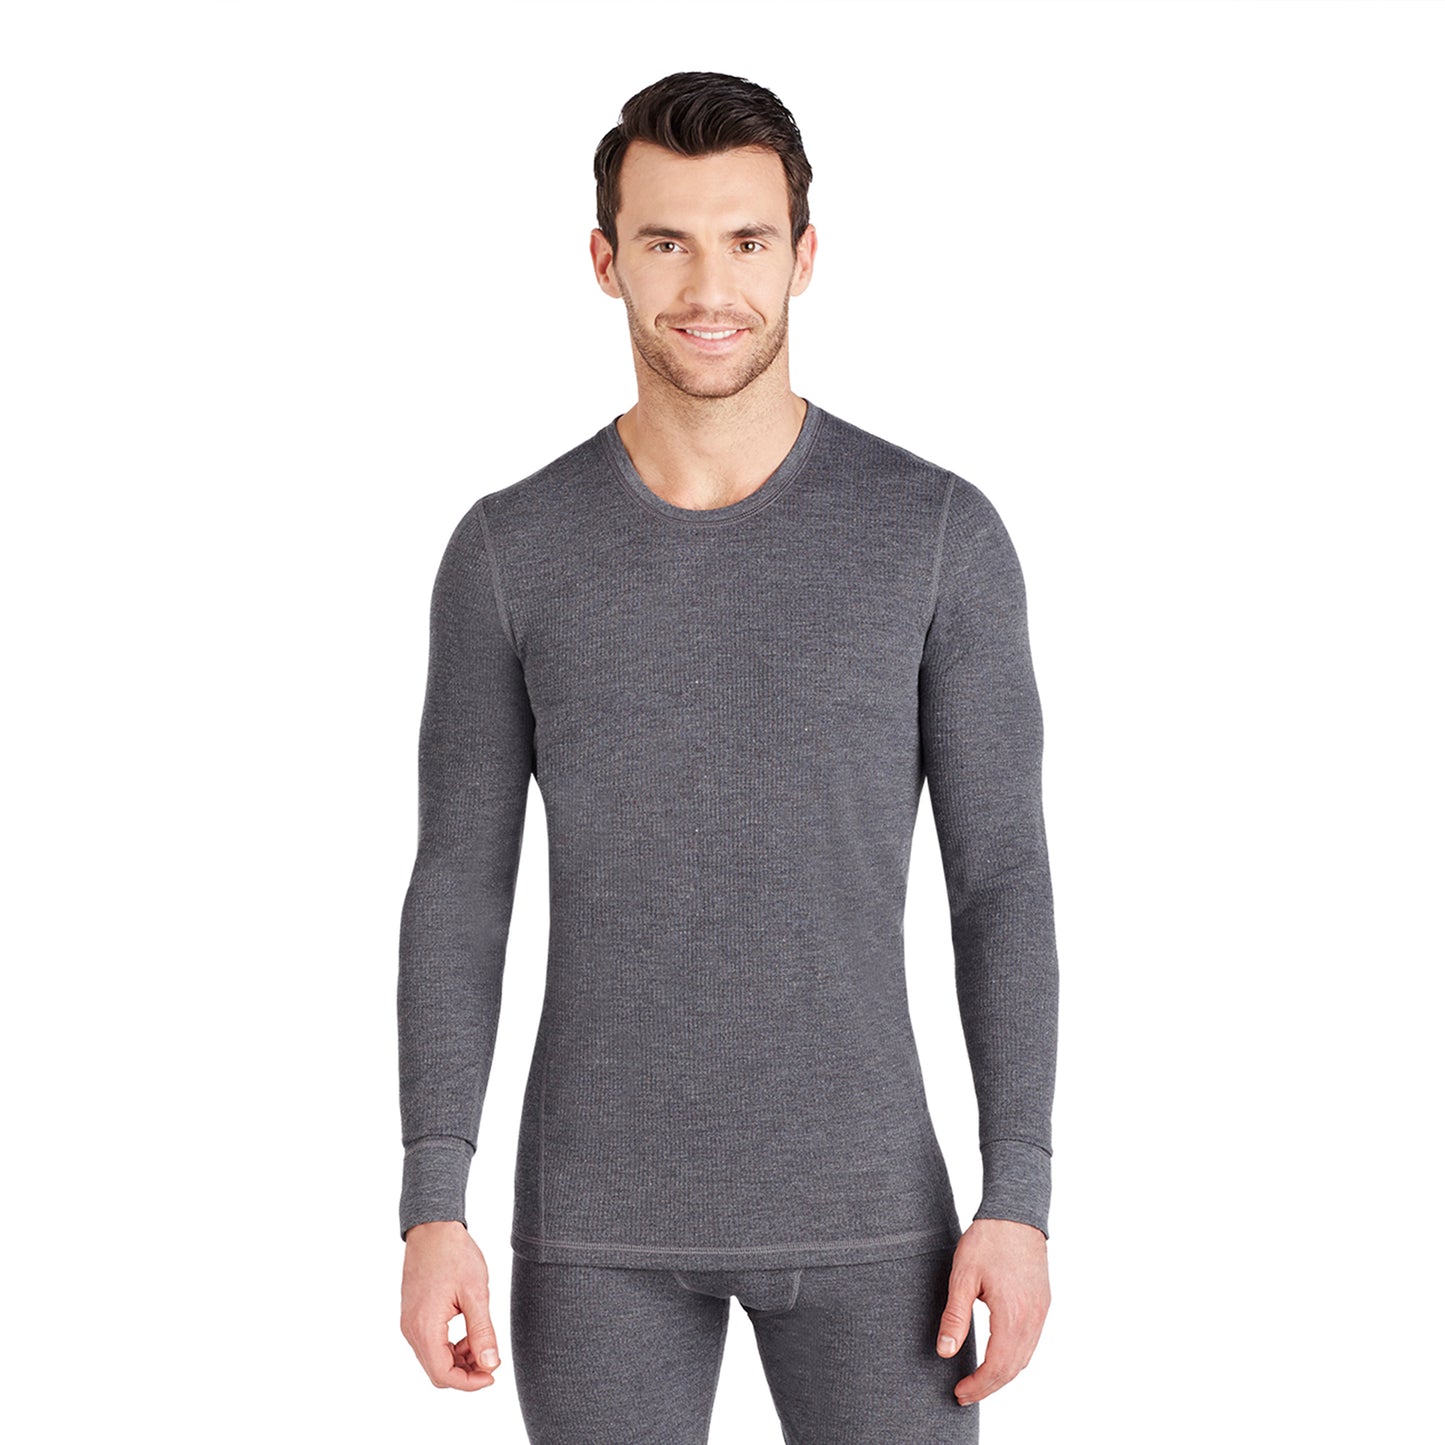 Charcoal Heather; Model is wearing size M. He is 5'11", Waist 32", Inseam 31".@Upper body of a man wearing long sleeve charcoal heather crew